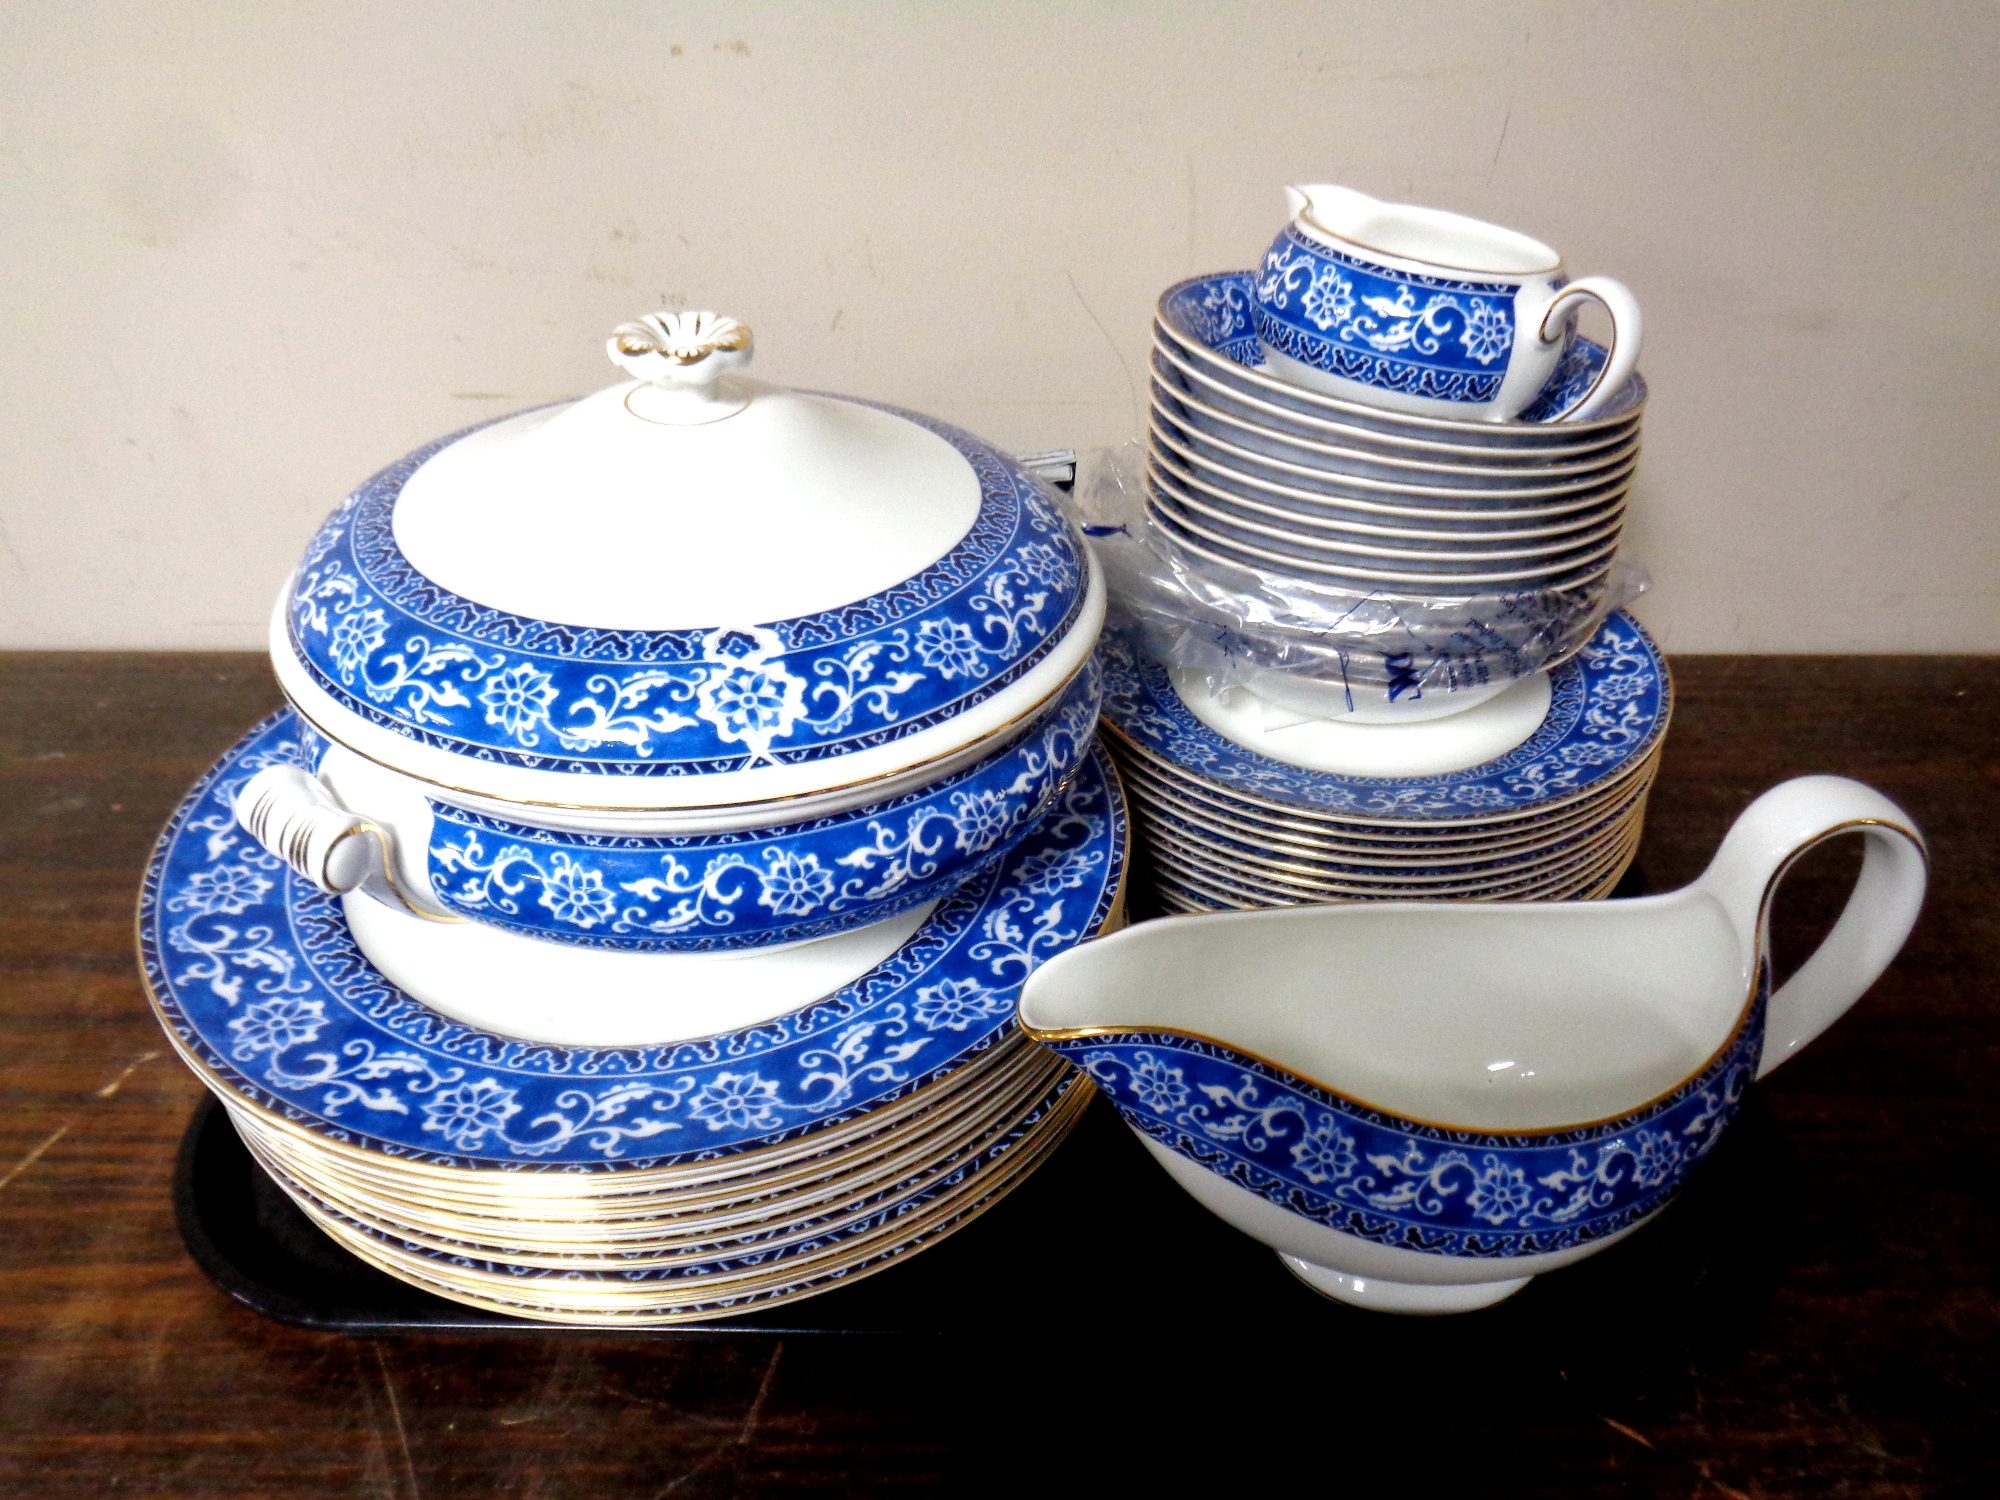 A tray containing 39 pieces of Wedgwood Bokhara bone china dinnerware